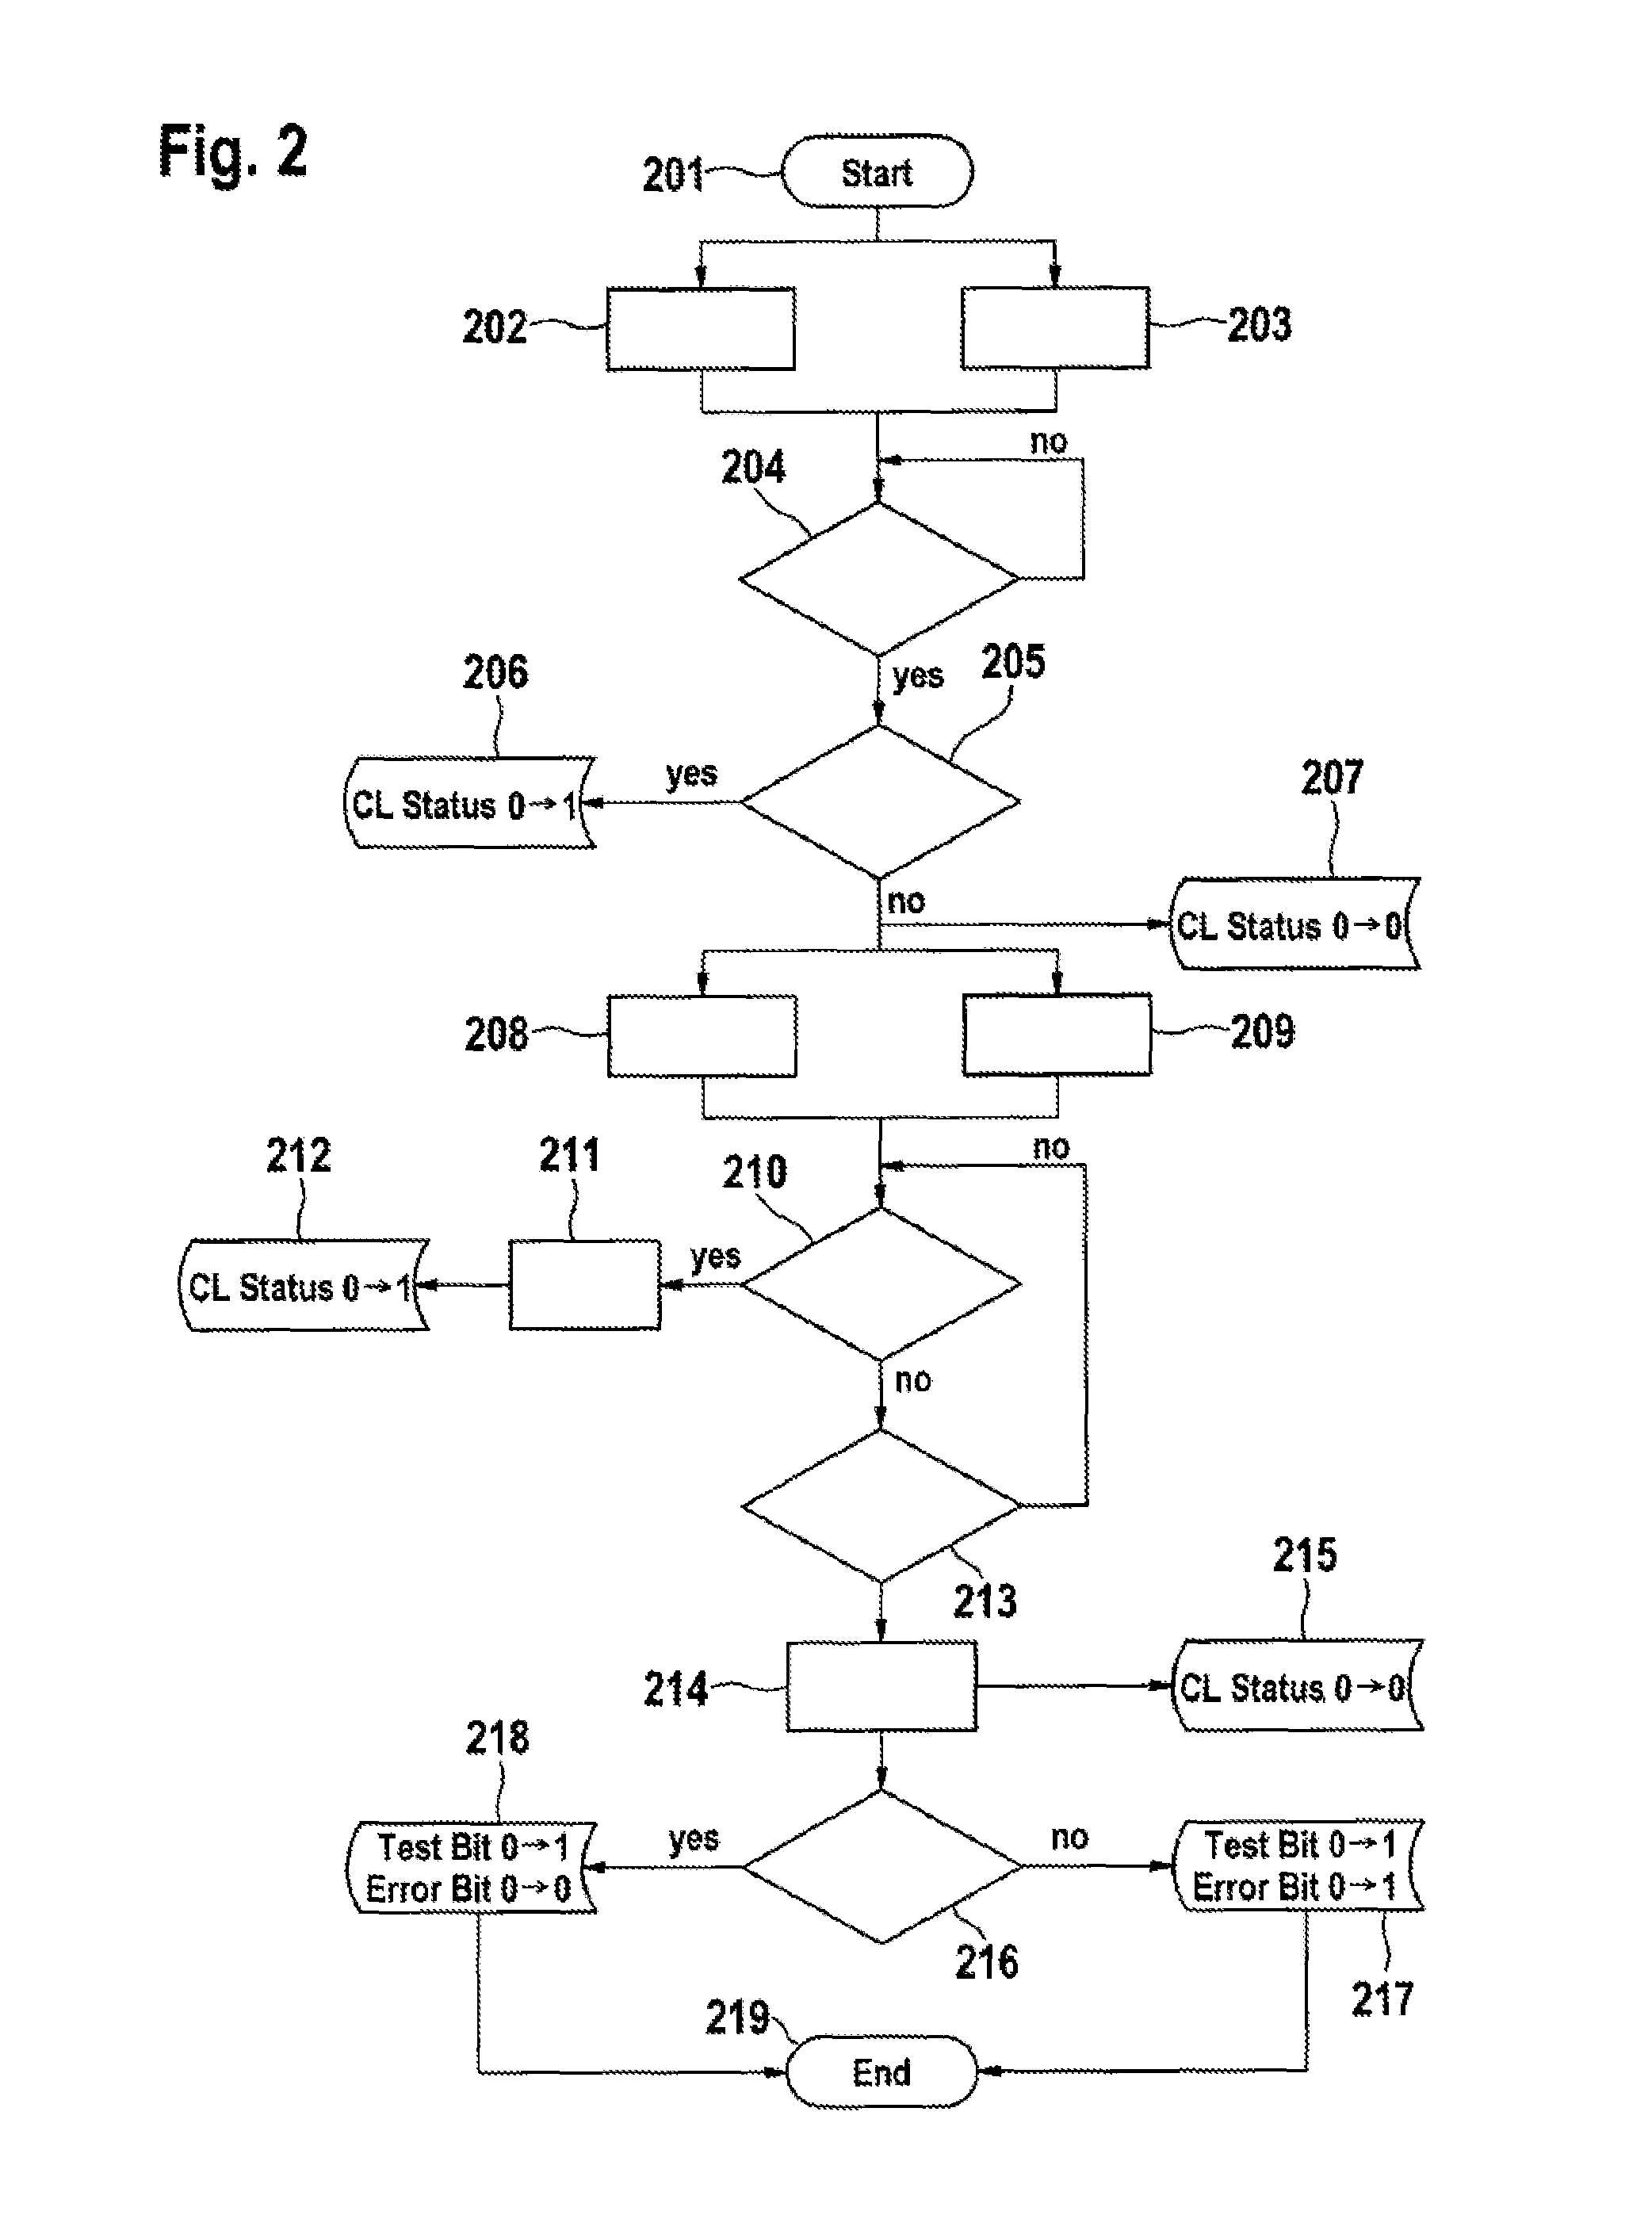 Method for monitoring the enabling of a system